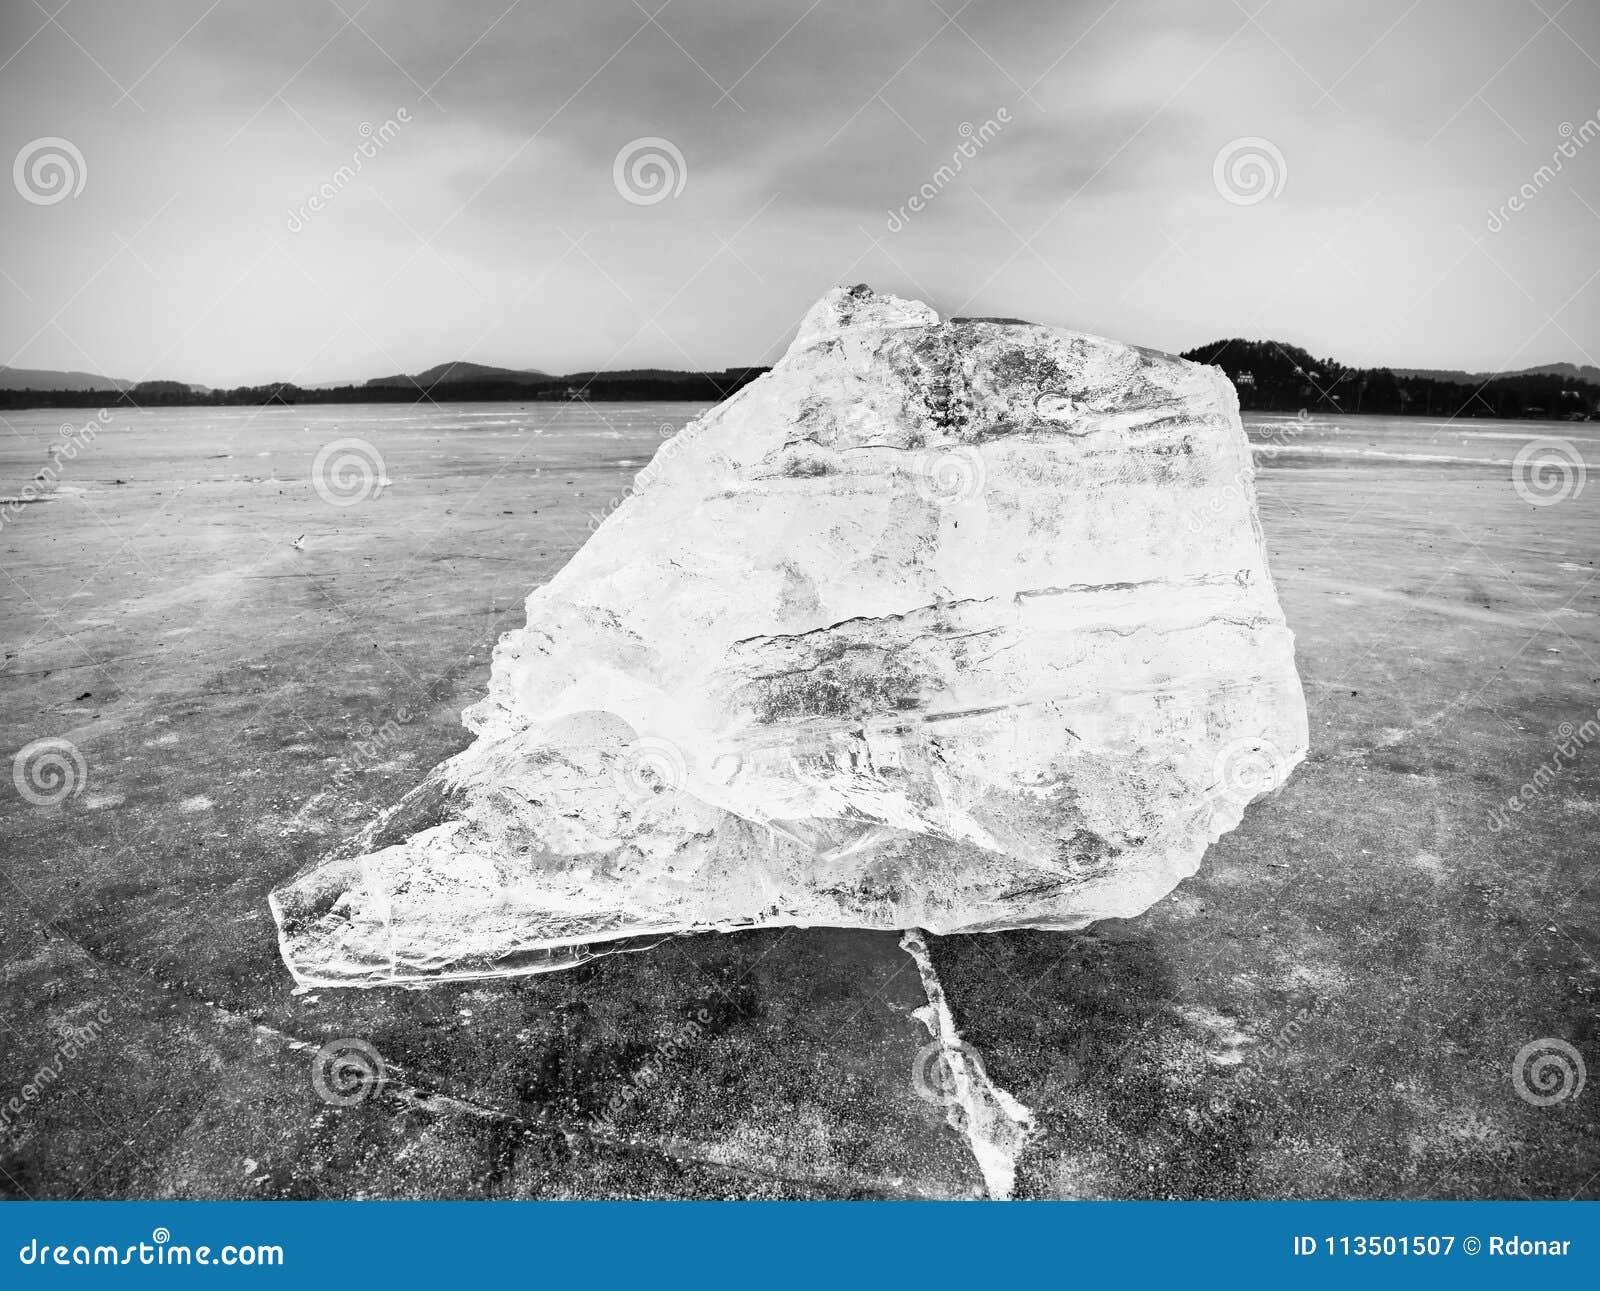 Ice With Reflection On Lake. Crushed Ice Floe On Reflective Natural ...